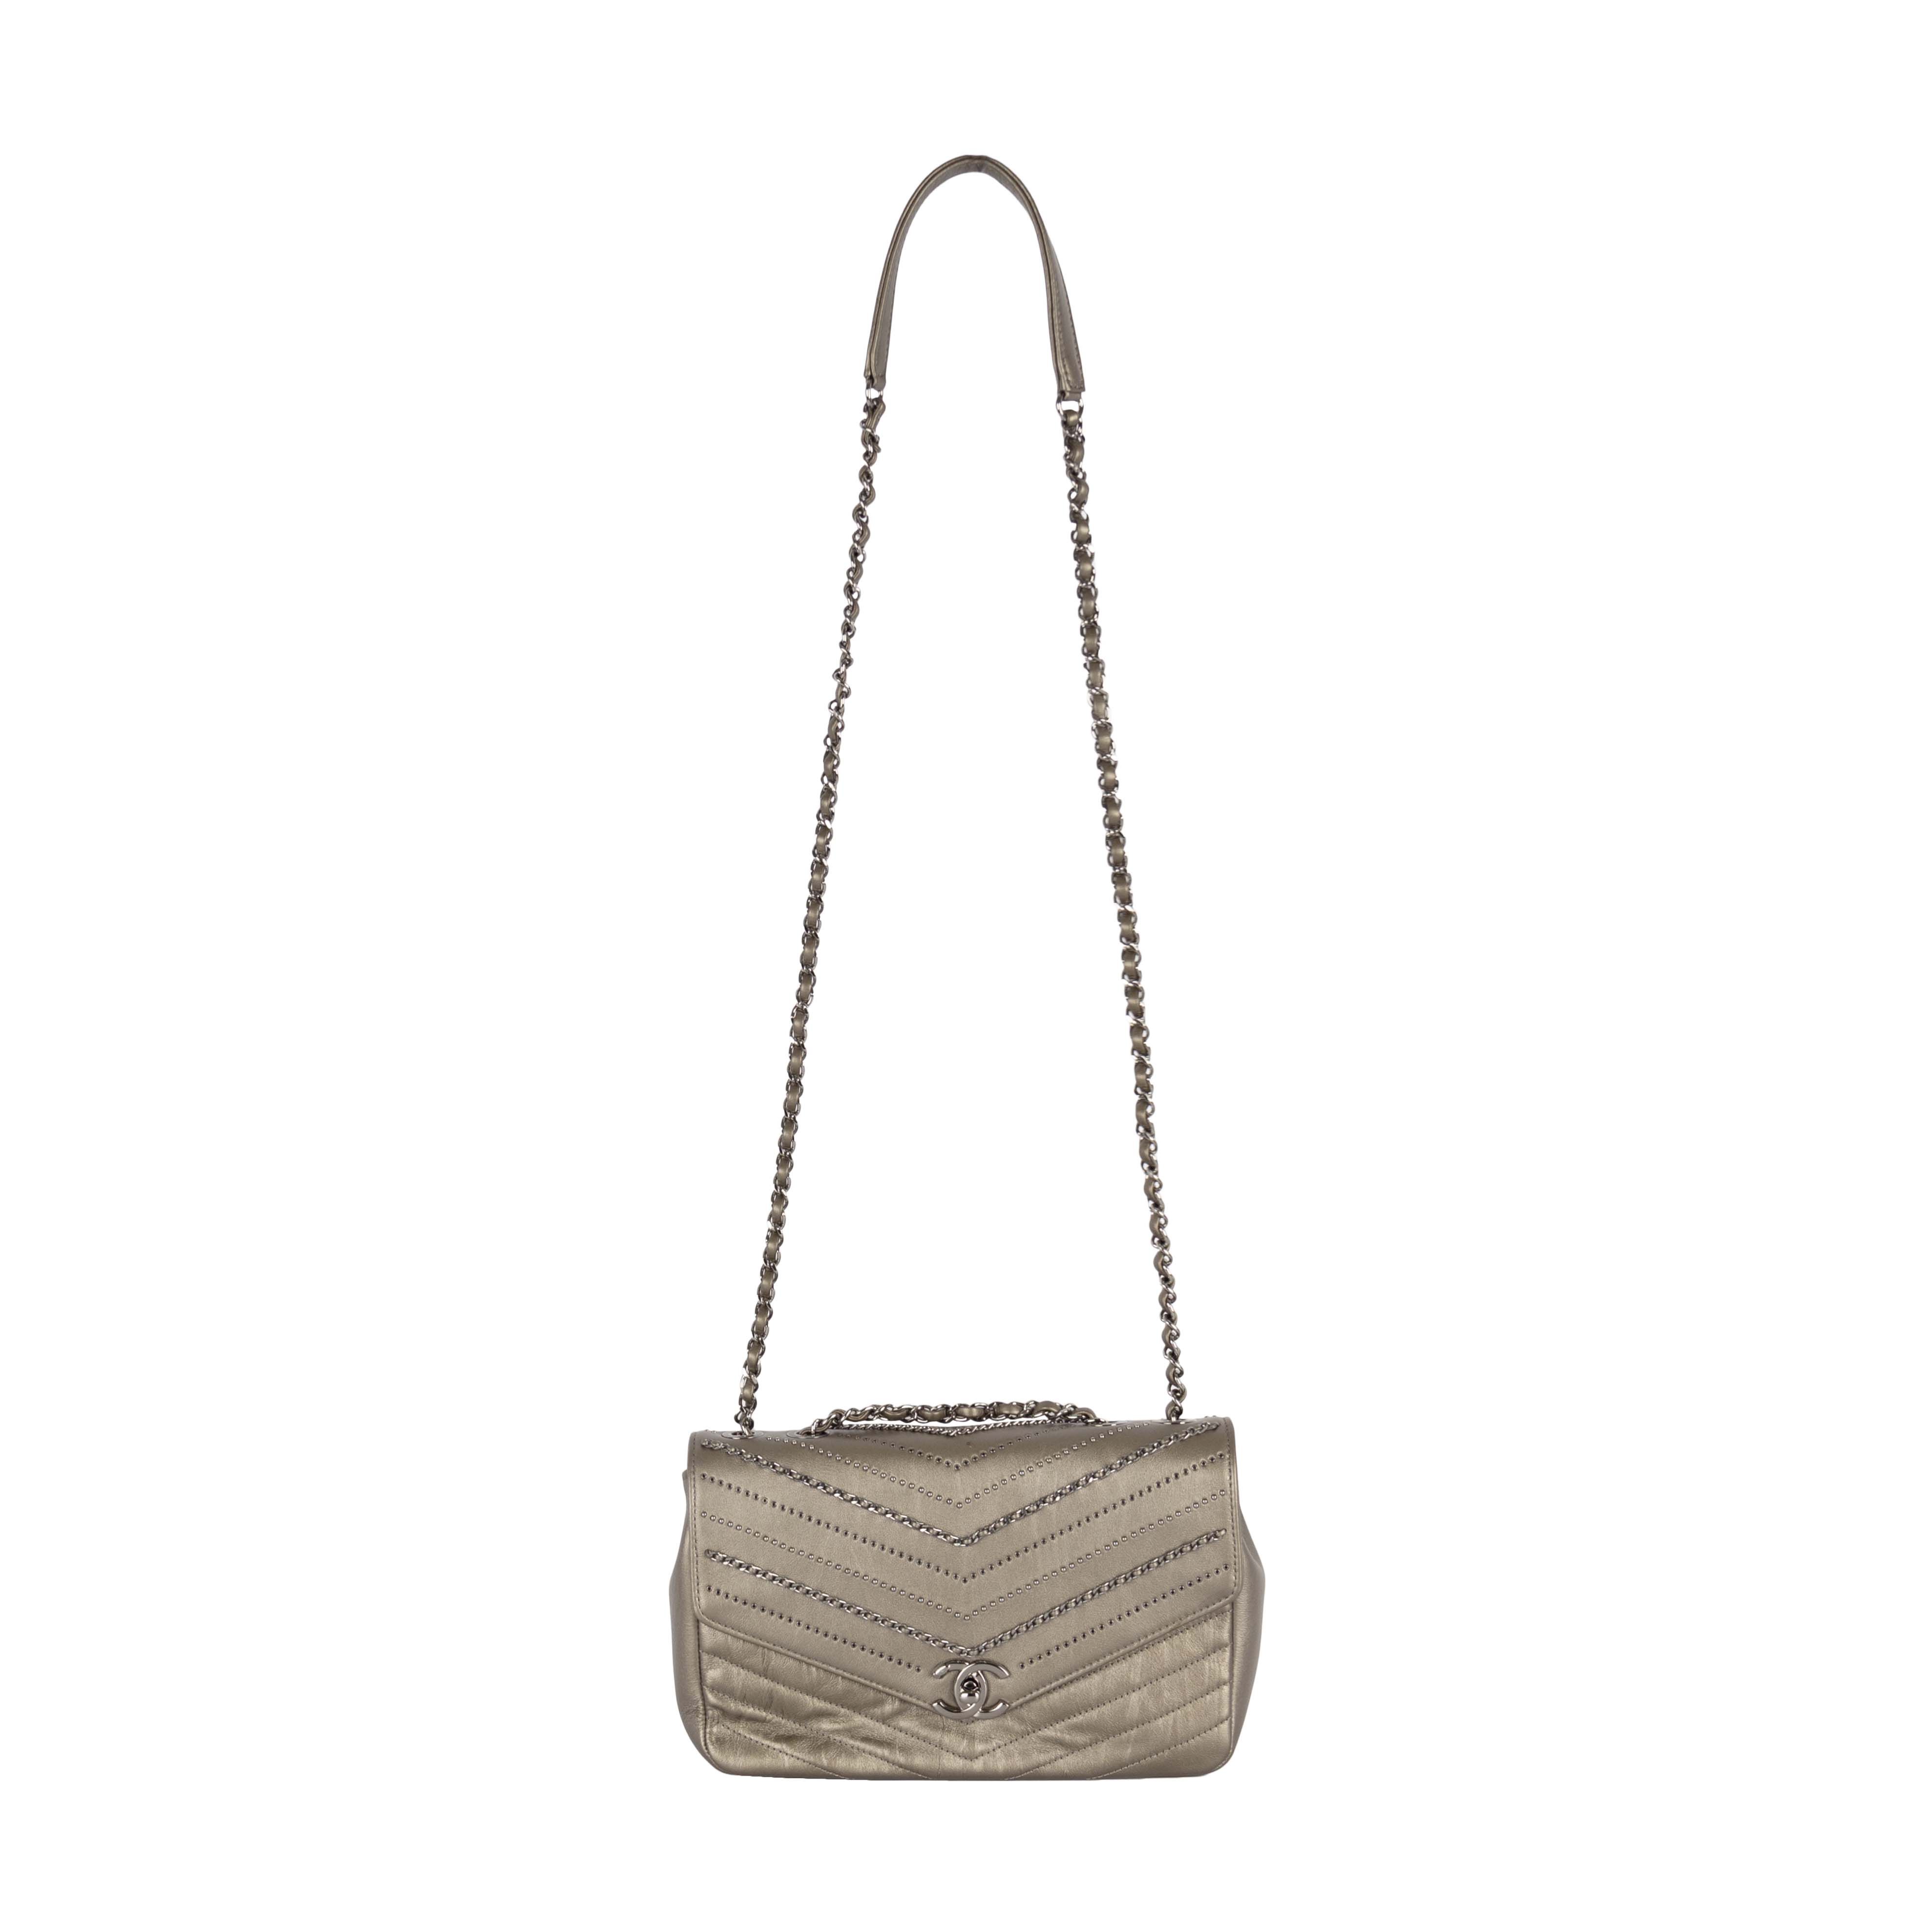 Chanel Embellished 'Chain Sequins' Chevron Flap Bag - '10s